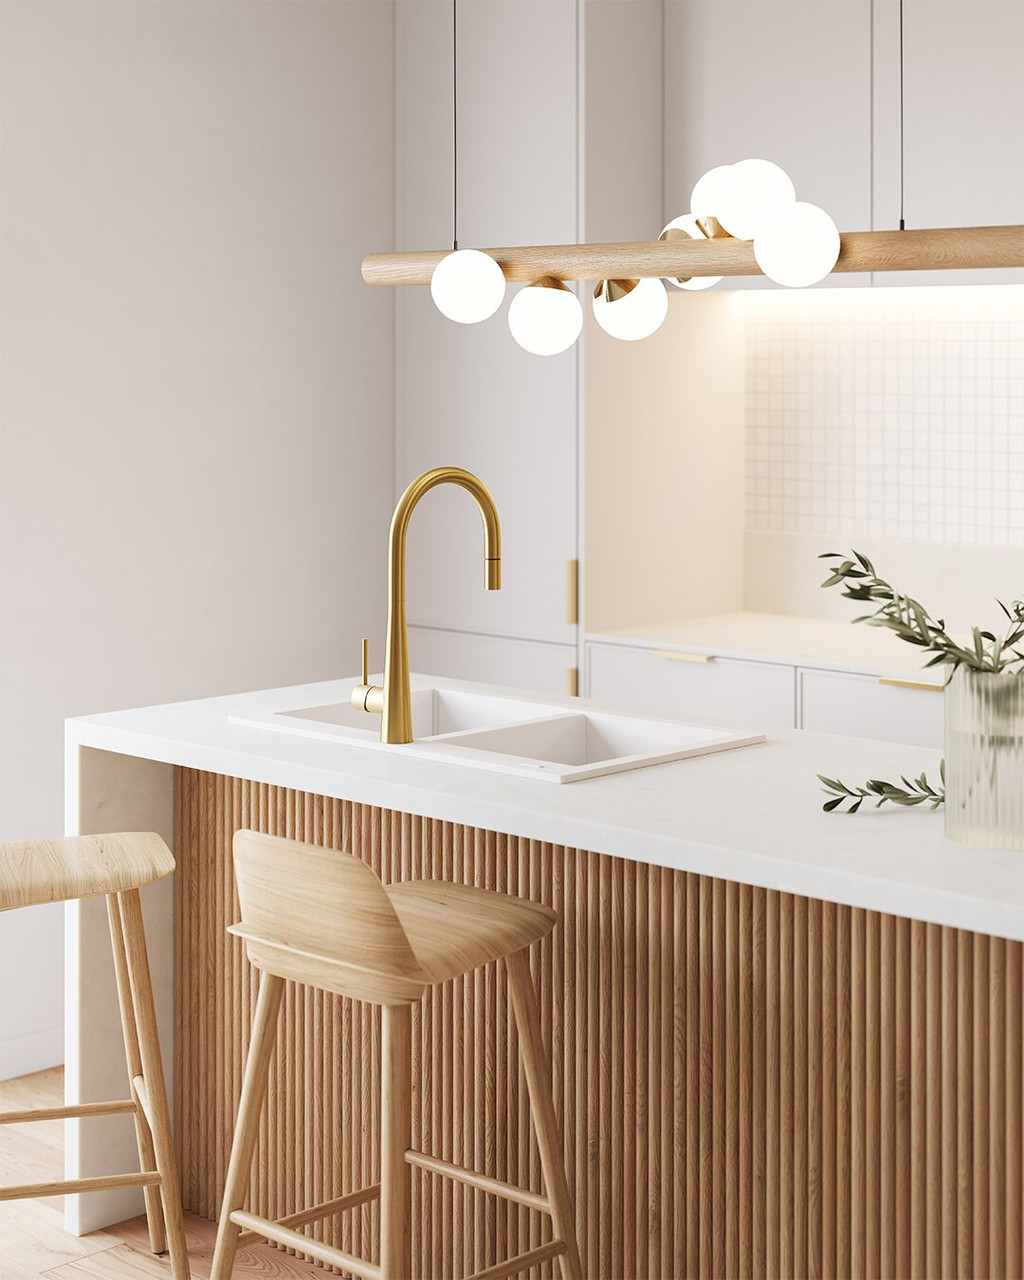 SS2525AU - Essente Goose Neck Pull Out Mixer Tap - Gold